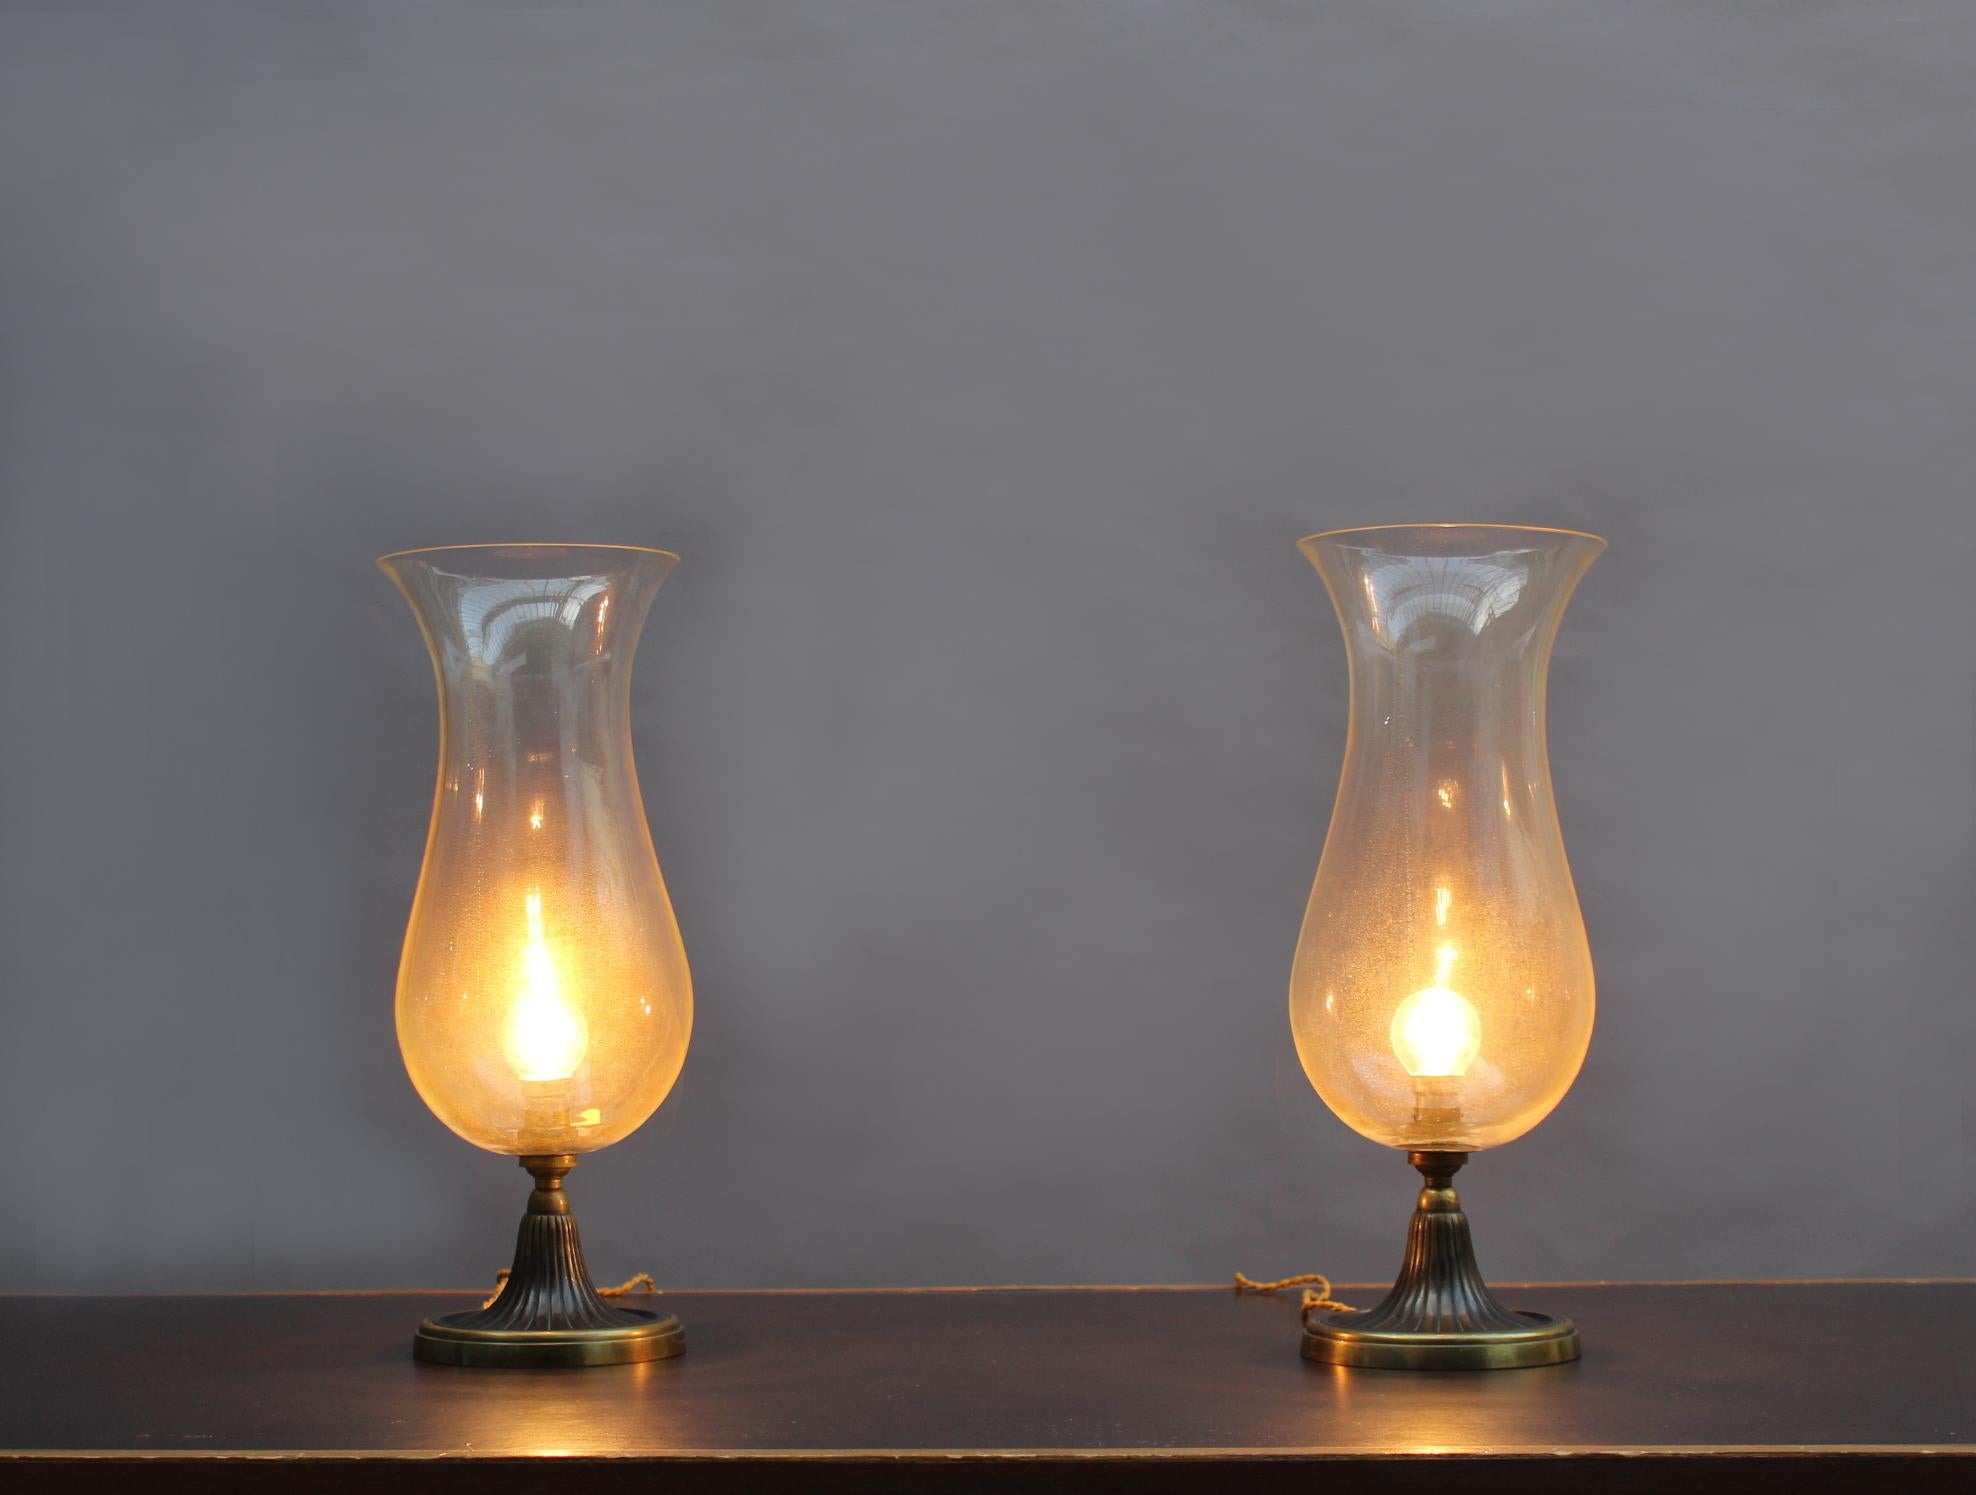 Hand blown, with a gold-dusted glass tulip shape shade mounted on a bronze base.
Original 